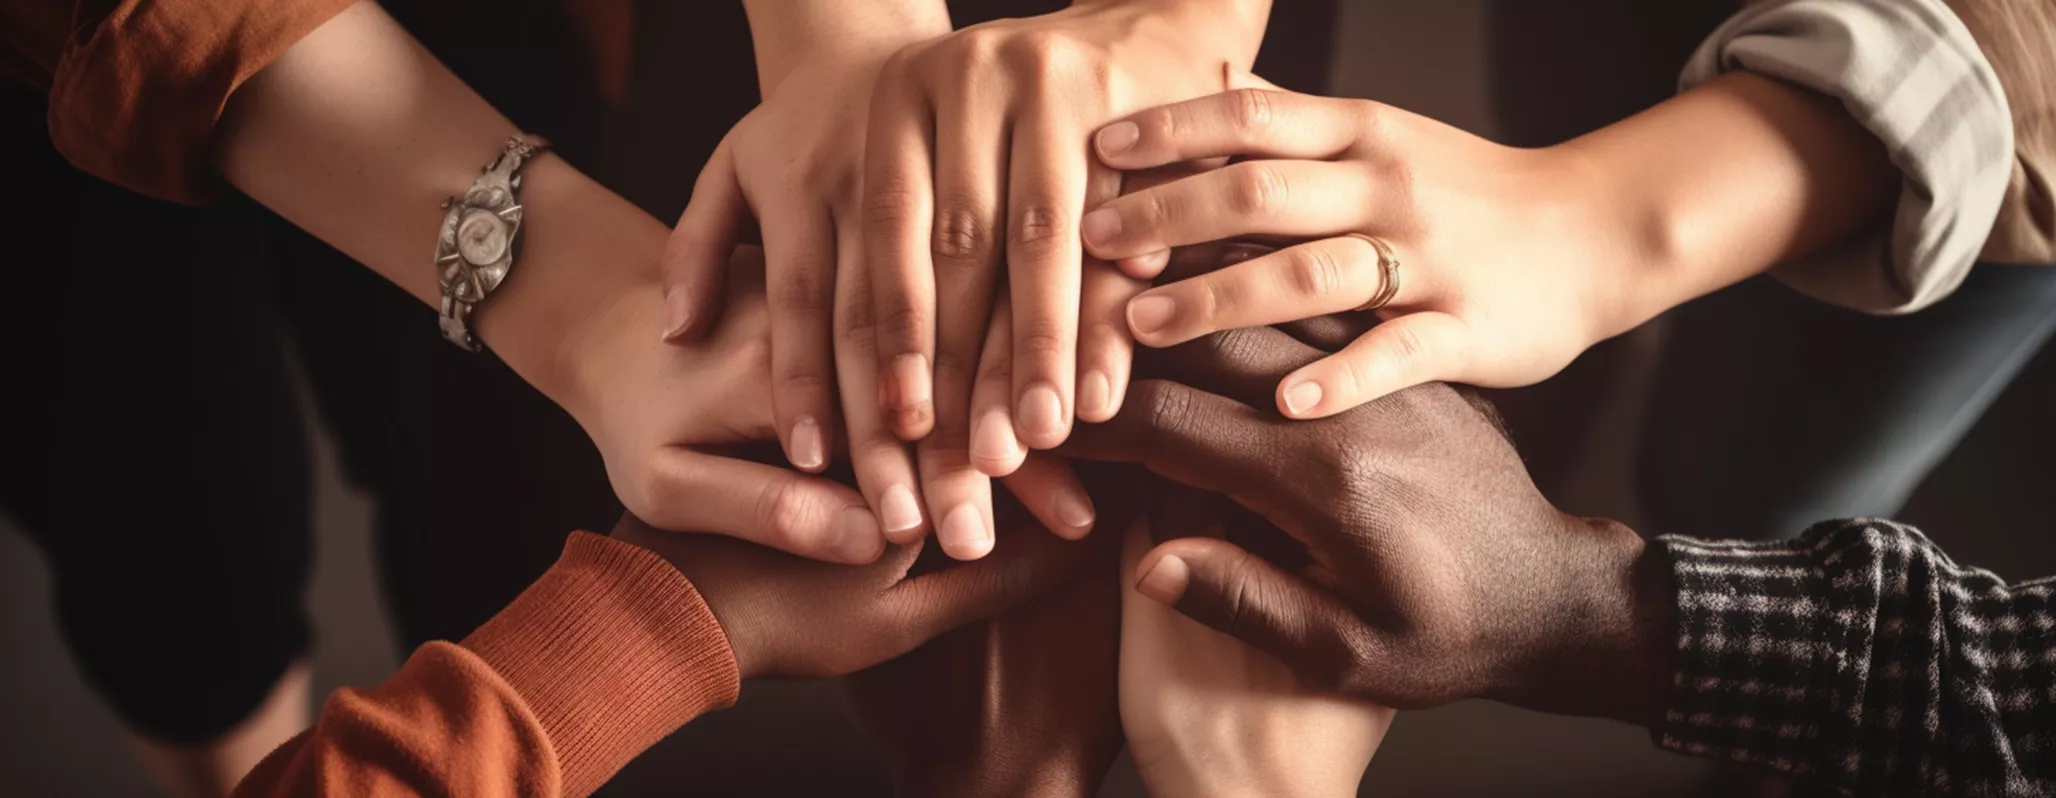 diverse group holding hands